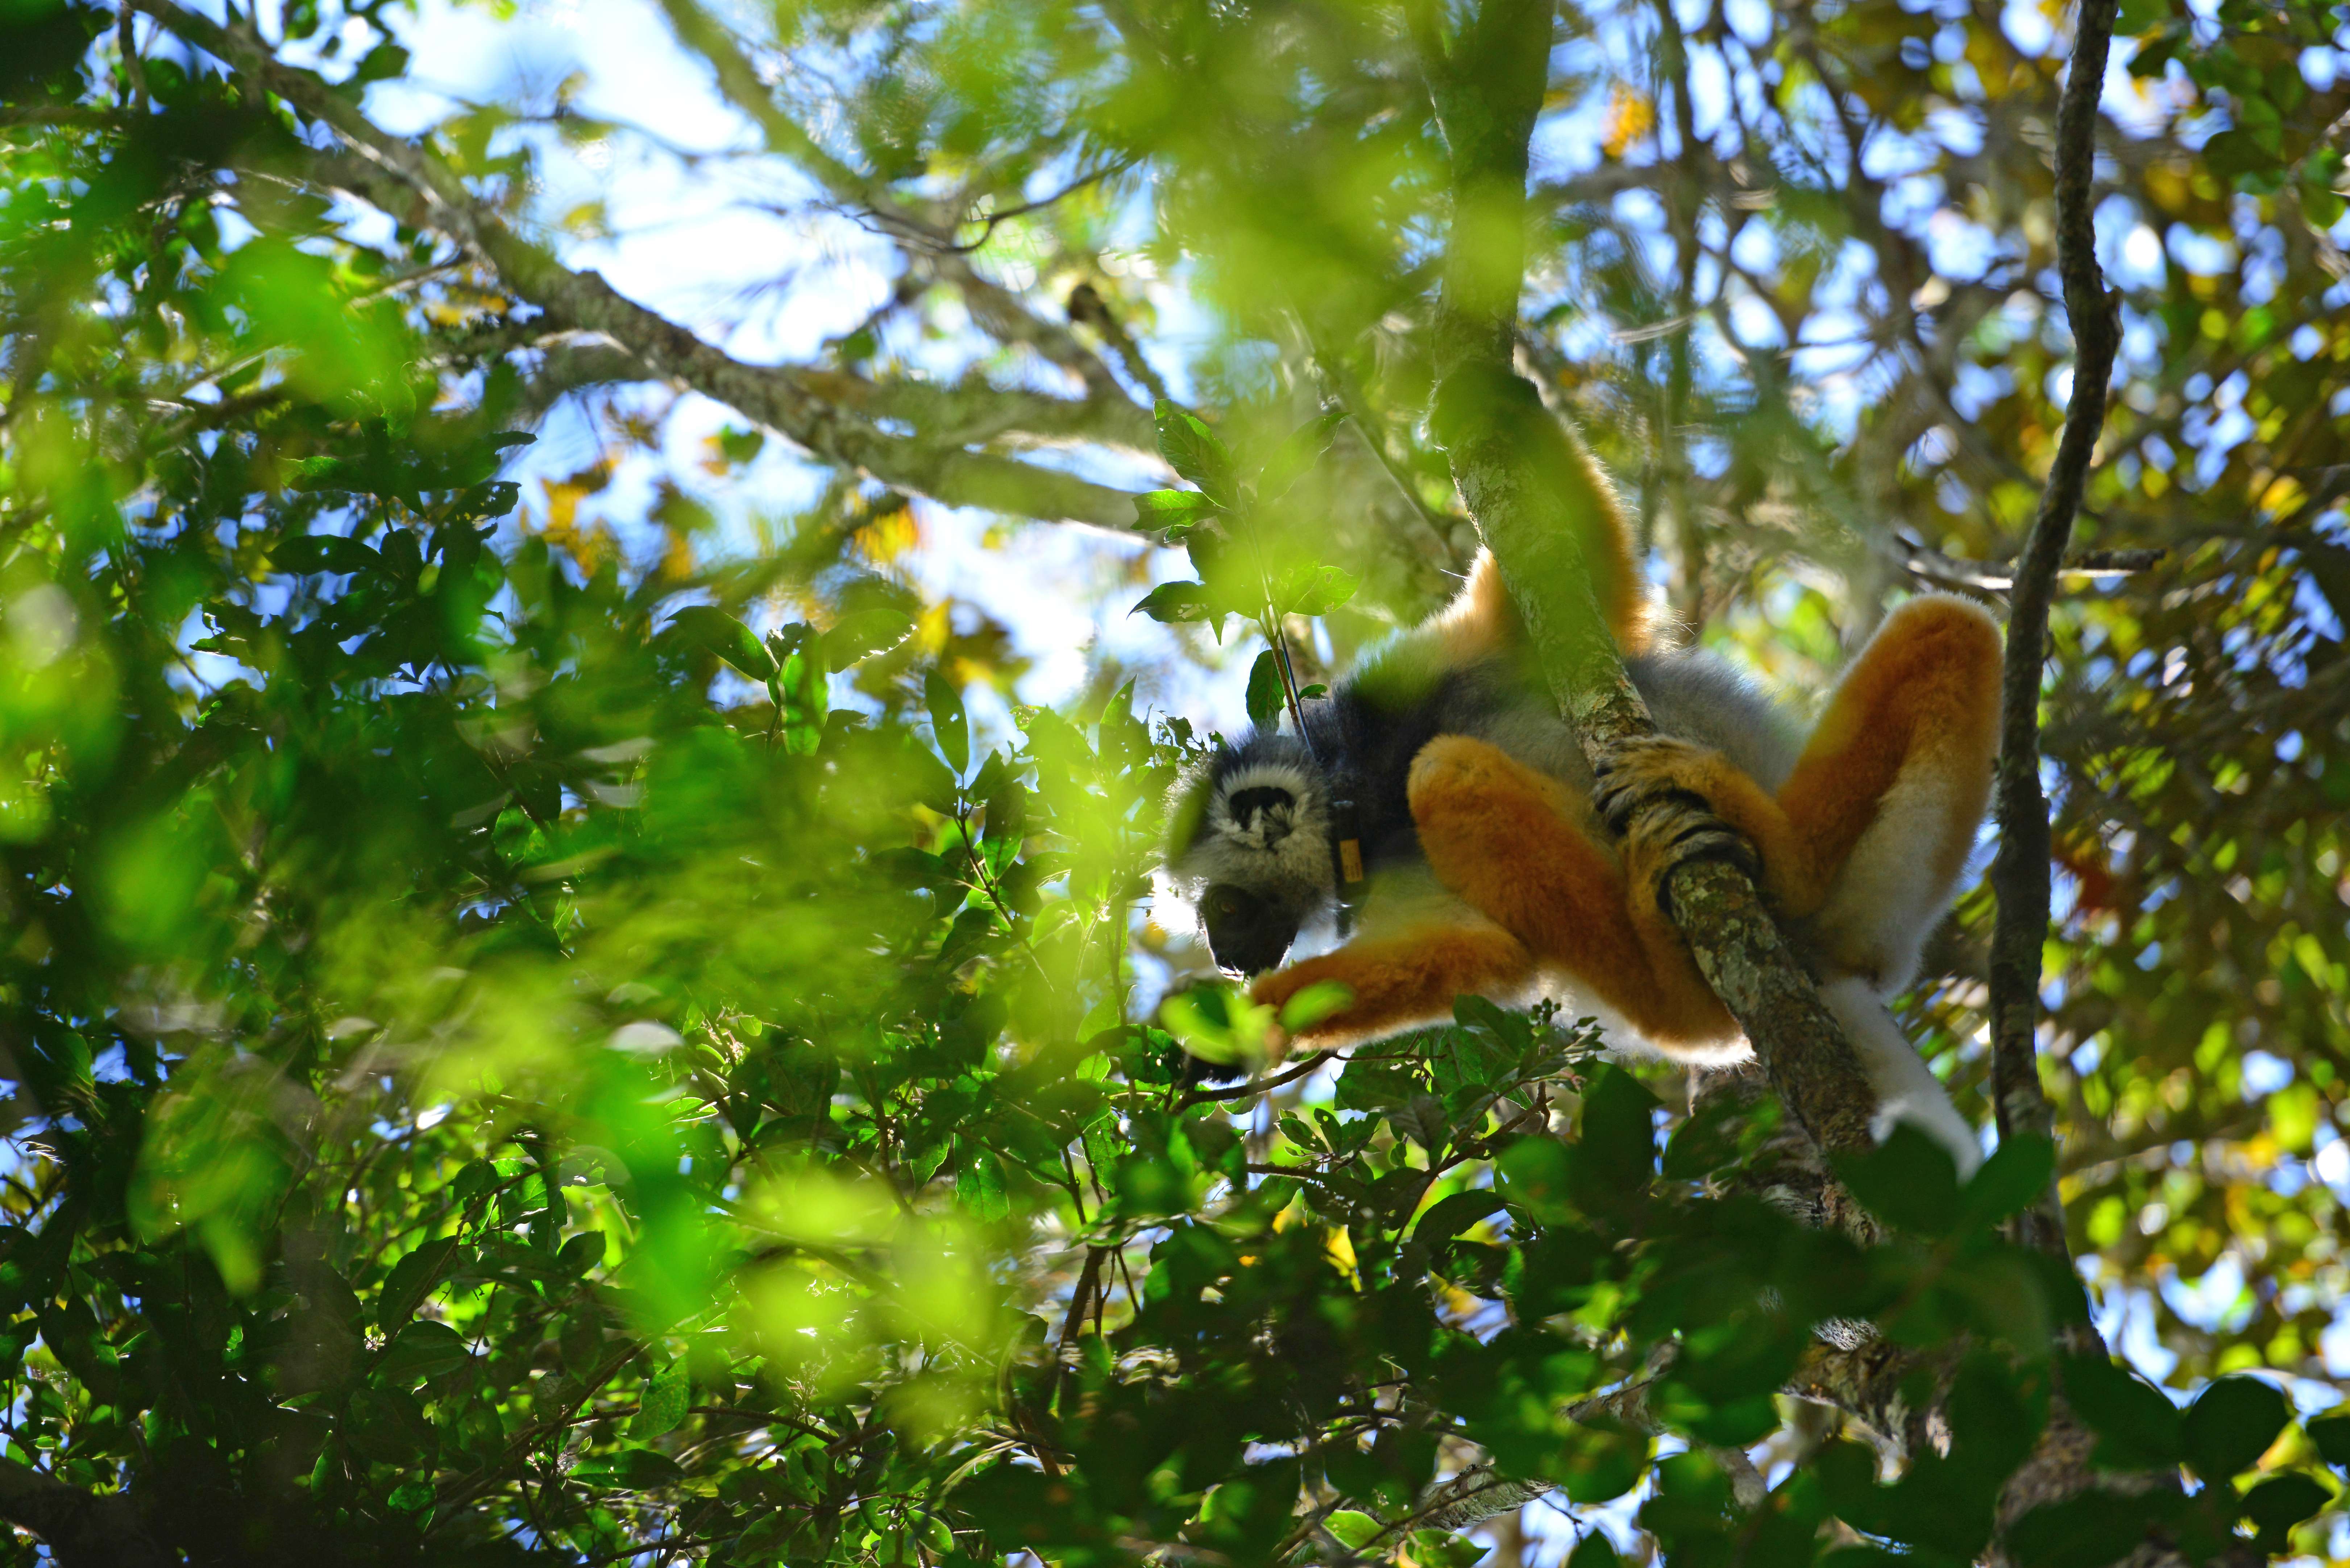 This radio-collared diademed sifaka is part of a research group in Andasibe National Park. © WWF-US/Rachel Kramer